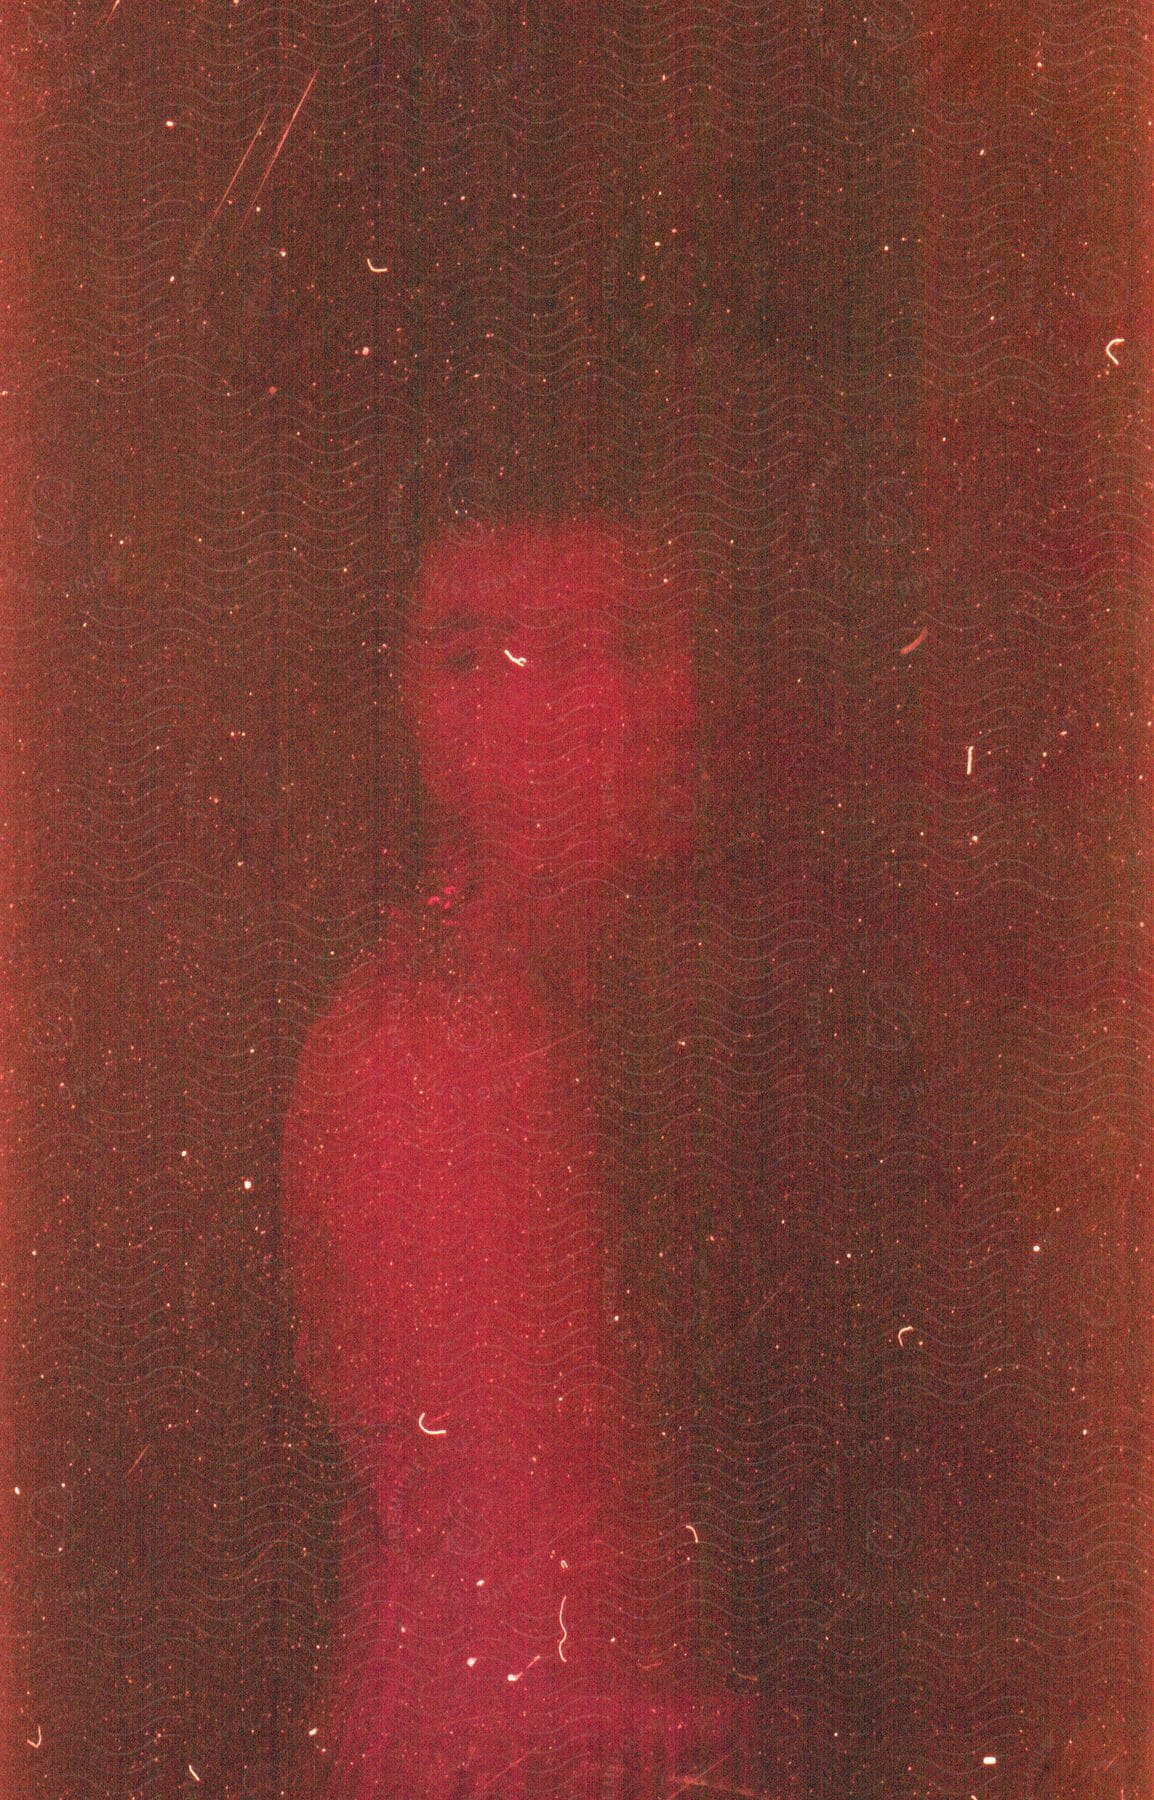 Woman under red lights against a textured surface in multiple exposure